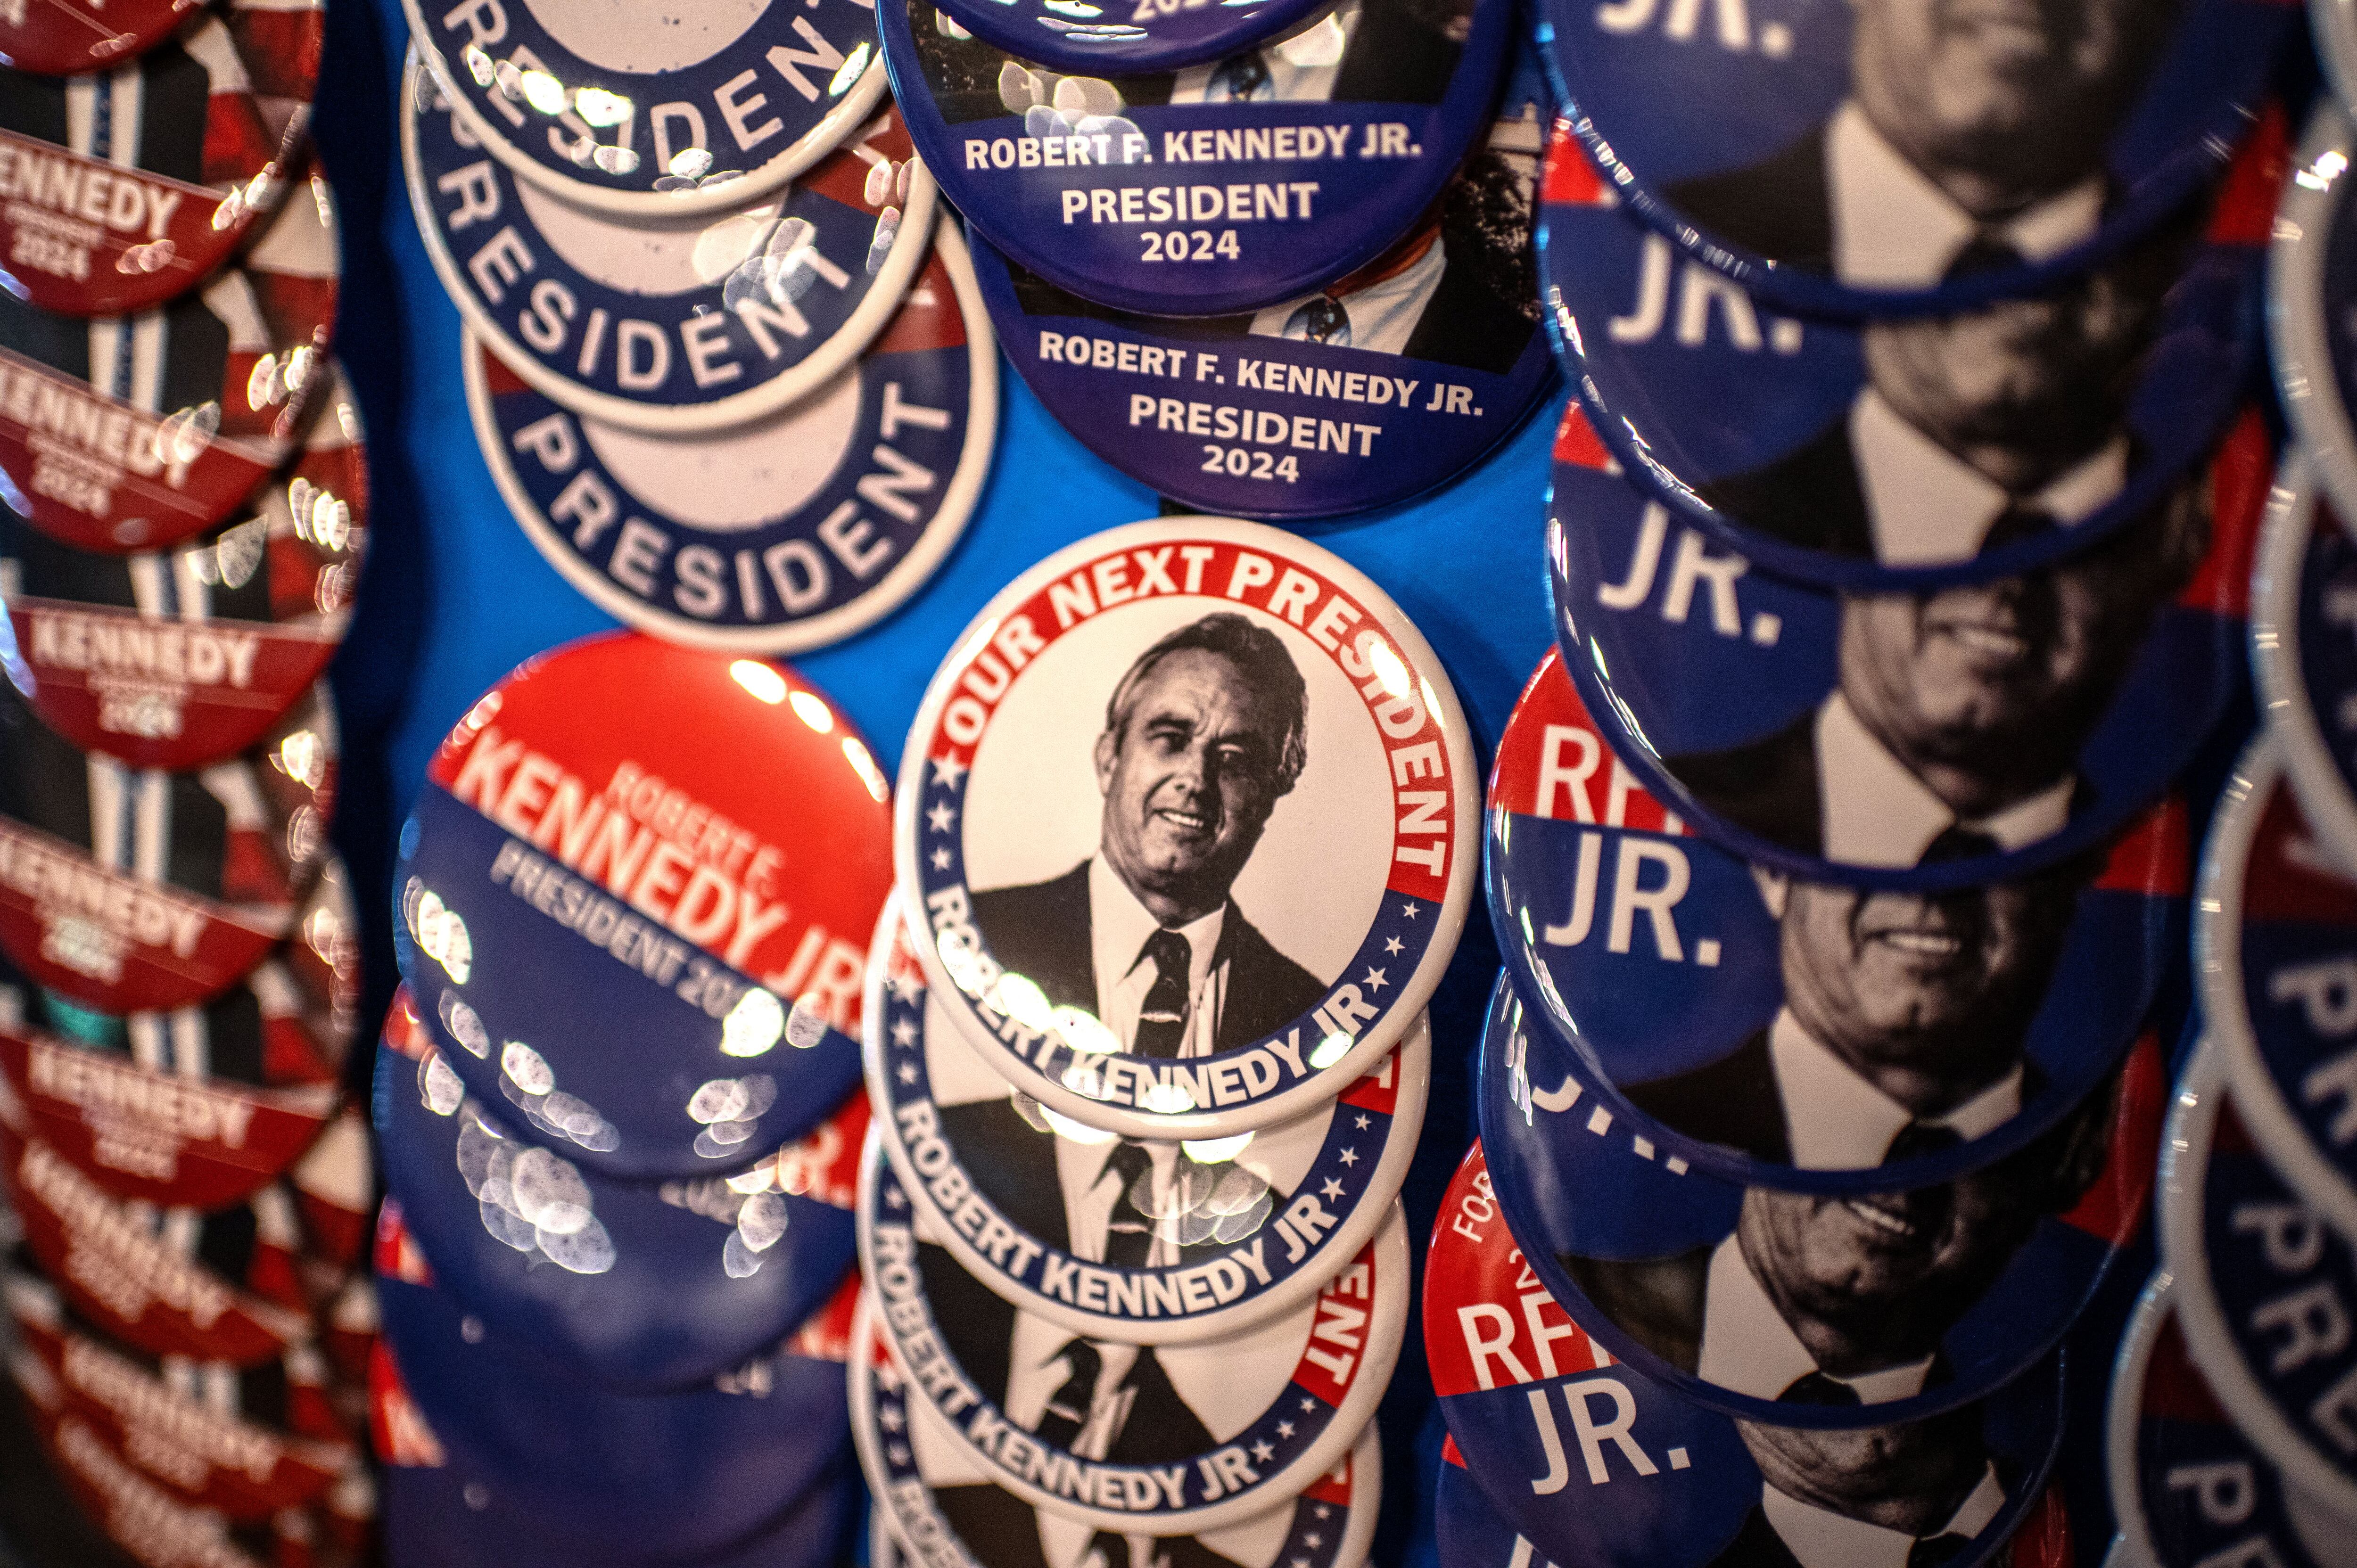 Buttons for sale at a rally for independent presidential candidate Robert F. Kennedy Jr. on May 13, 2024 in Austin, Texas.  (Photo SERGIO FLORES/AFP).